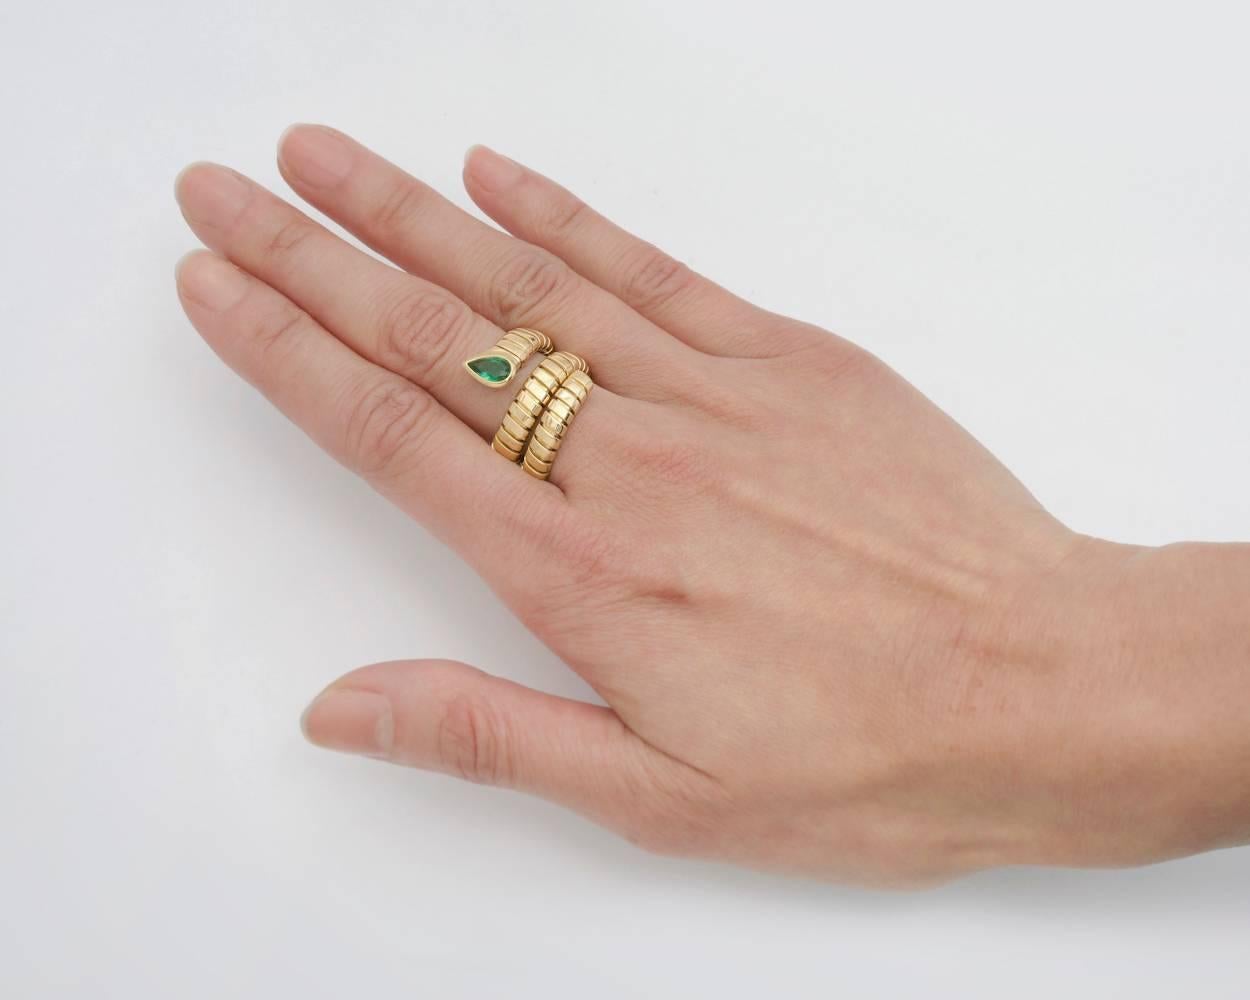 "Tubogas" three-row wrap ring, in high-polished 18k yellow gold with a pear-shaped emerald on one end, stamped 'BVLGARI'. Slightly flexible, so it fits a size 6.25-6.5 comfortably.
